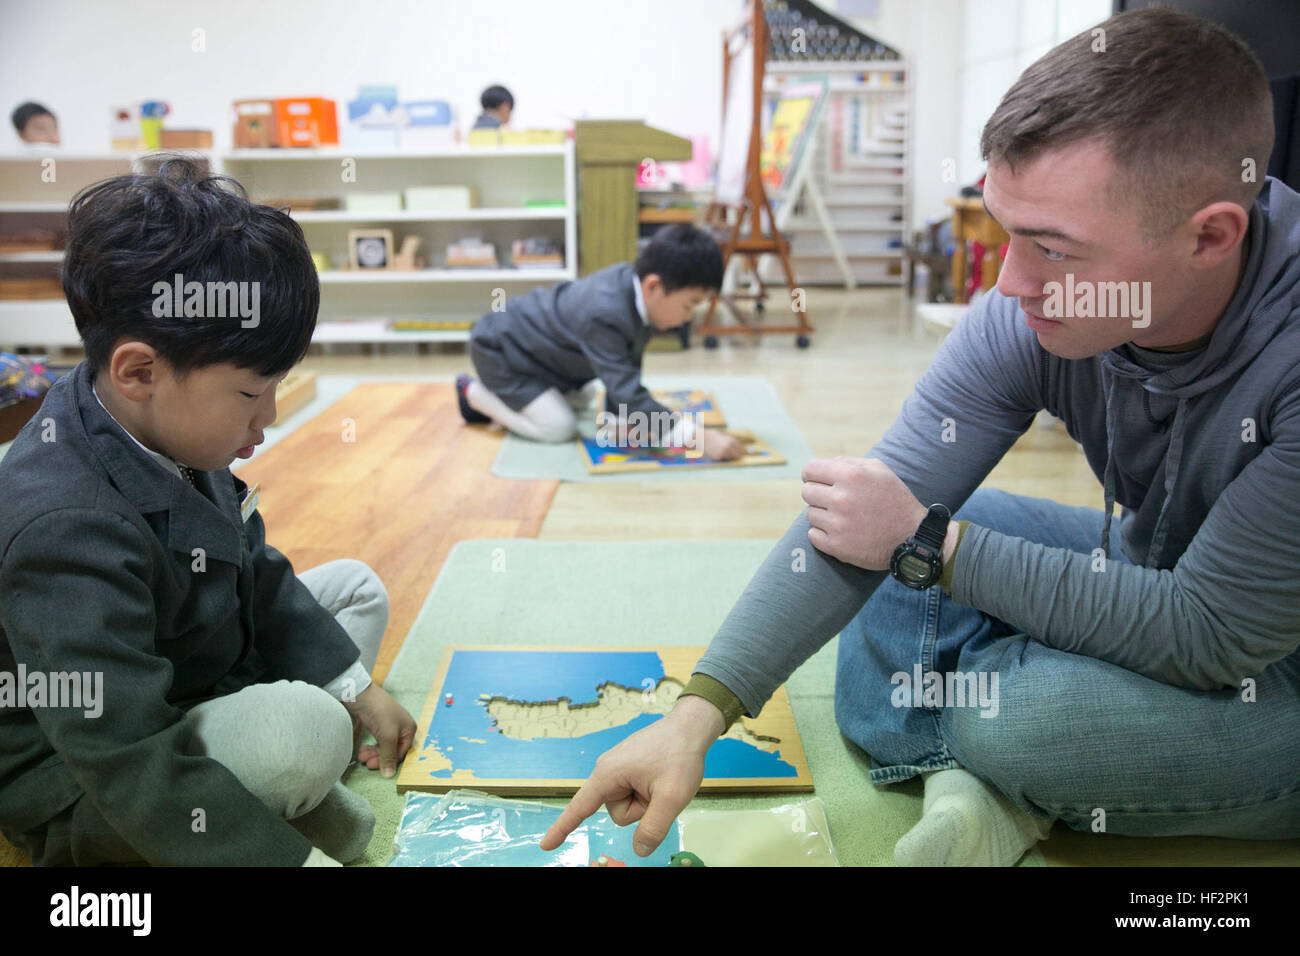 Sgt. Joshua Krutz builds a map with a student from St. Paul’s Elementary School in Pohang, South Korea. The meeting was brought on by a volunteer opportunity for the Marines and sailors of 2nd Battalion, 9th Marine Regiment, who are currently deployed to the Republic of Korea for Korean Marine Exchange Program 15-15. The volunteer opportunity supported the local area outside of Camp Mujuk and built better community relations. Krutz is a squad leader with Company G, 2nd Bn., 9th Marines, currently assigned to 3rd Marine Division, III Marine Expeditionary Force, under the unit deployment program Stock Photo